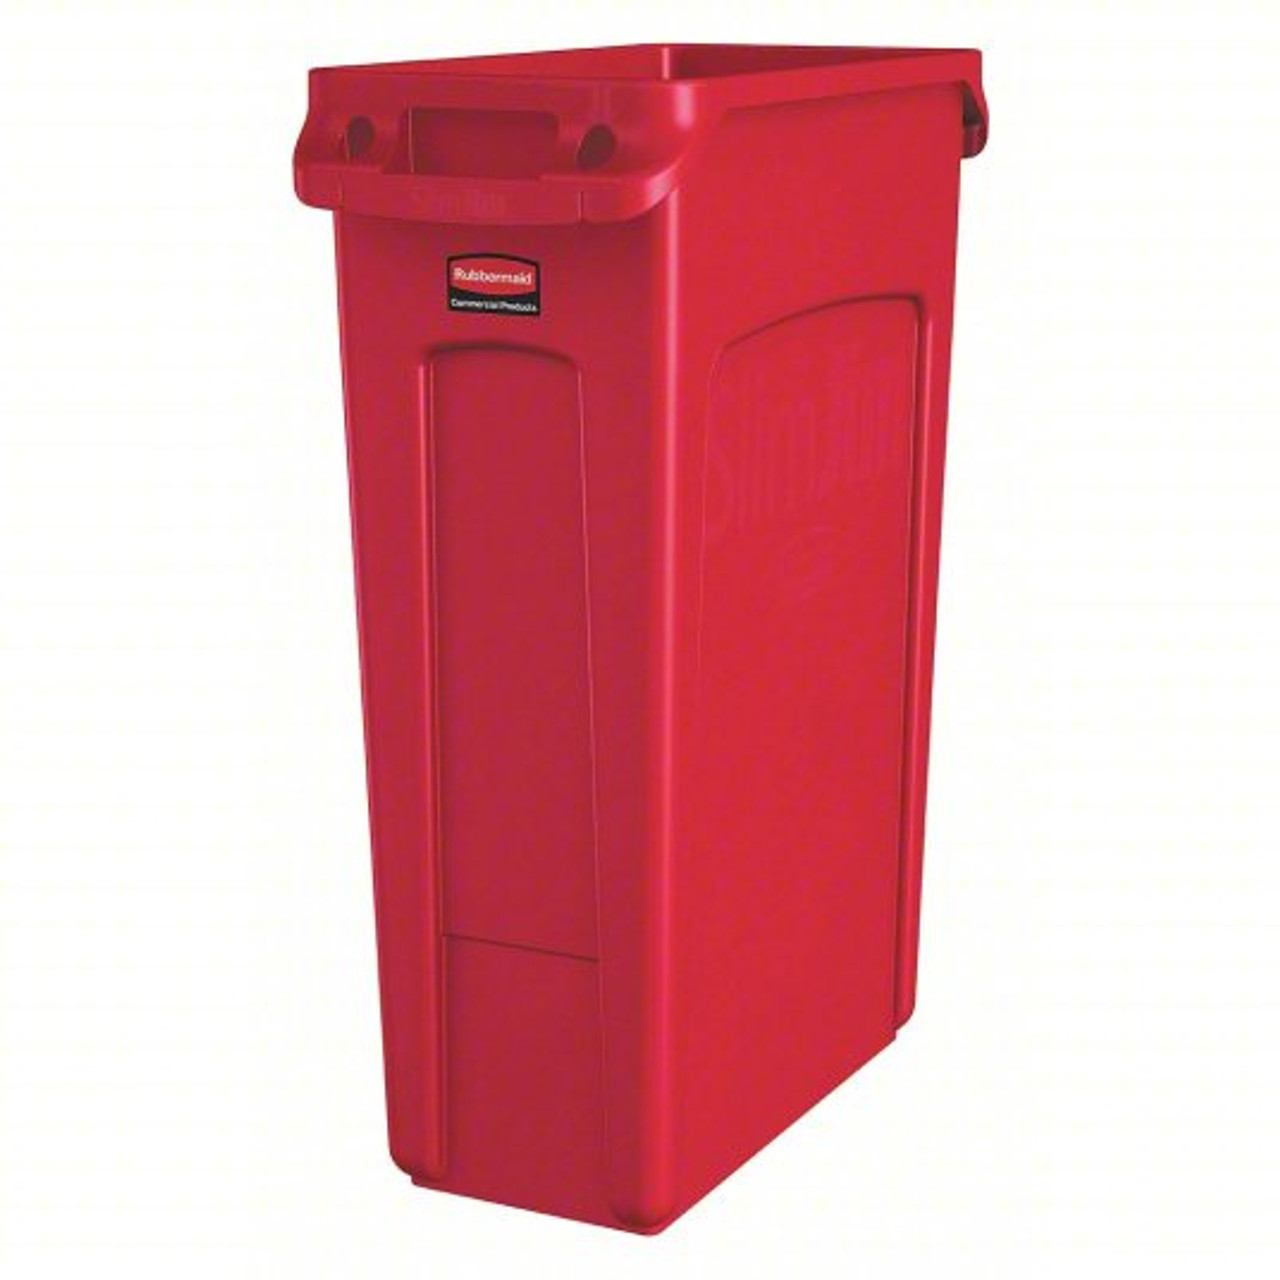 Rubbermaid Slim Jim Recycling Can, 23 Gallon, Red (3-Pack)